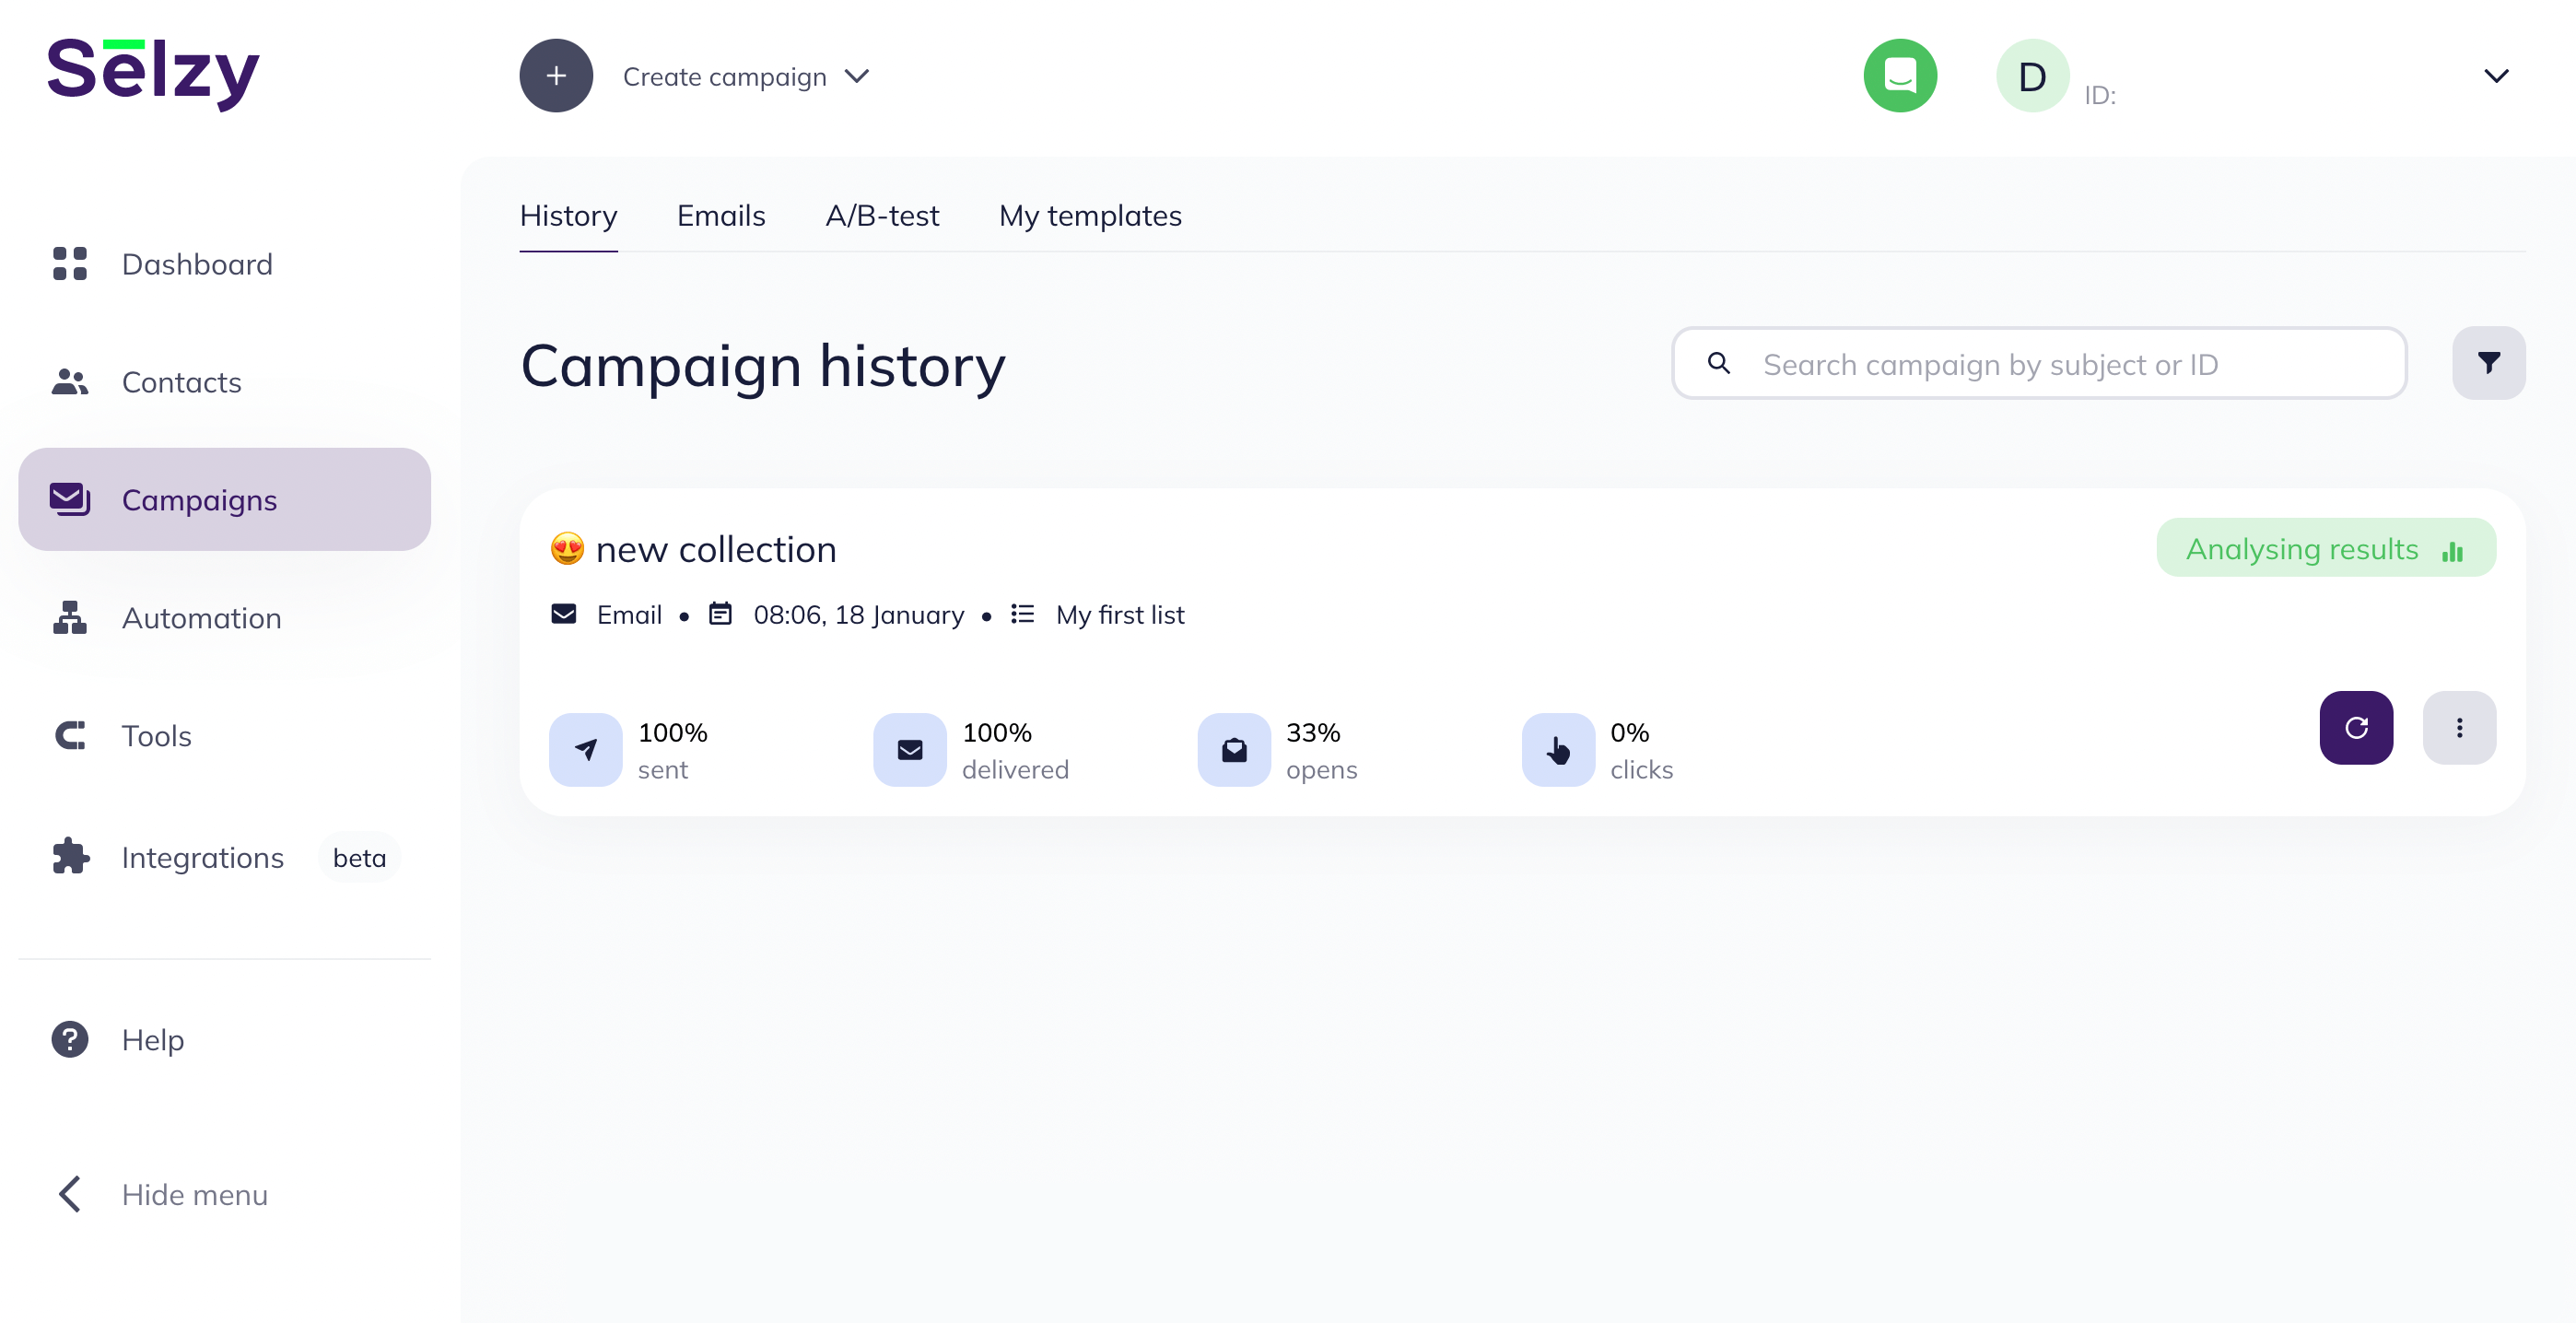 Selzy’s campaign analytics screen